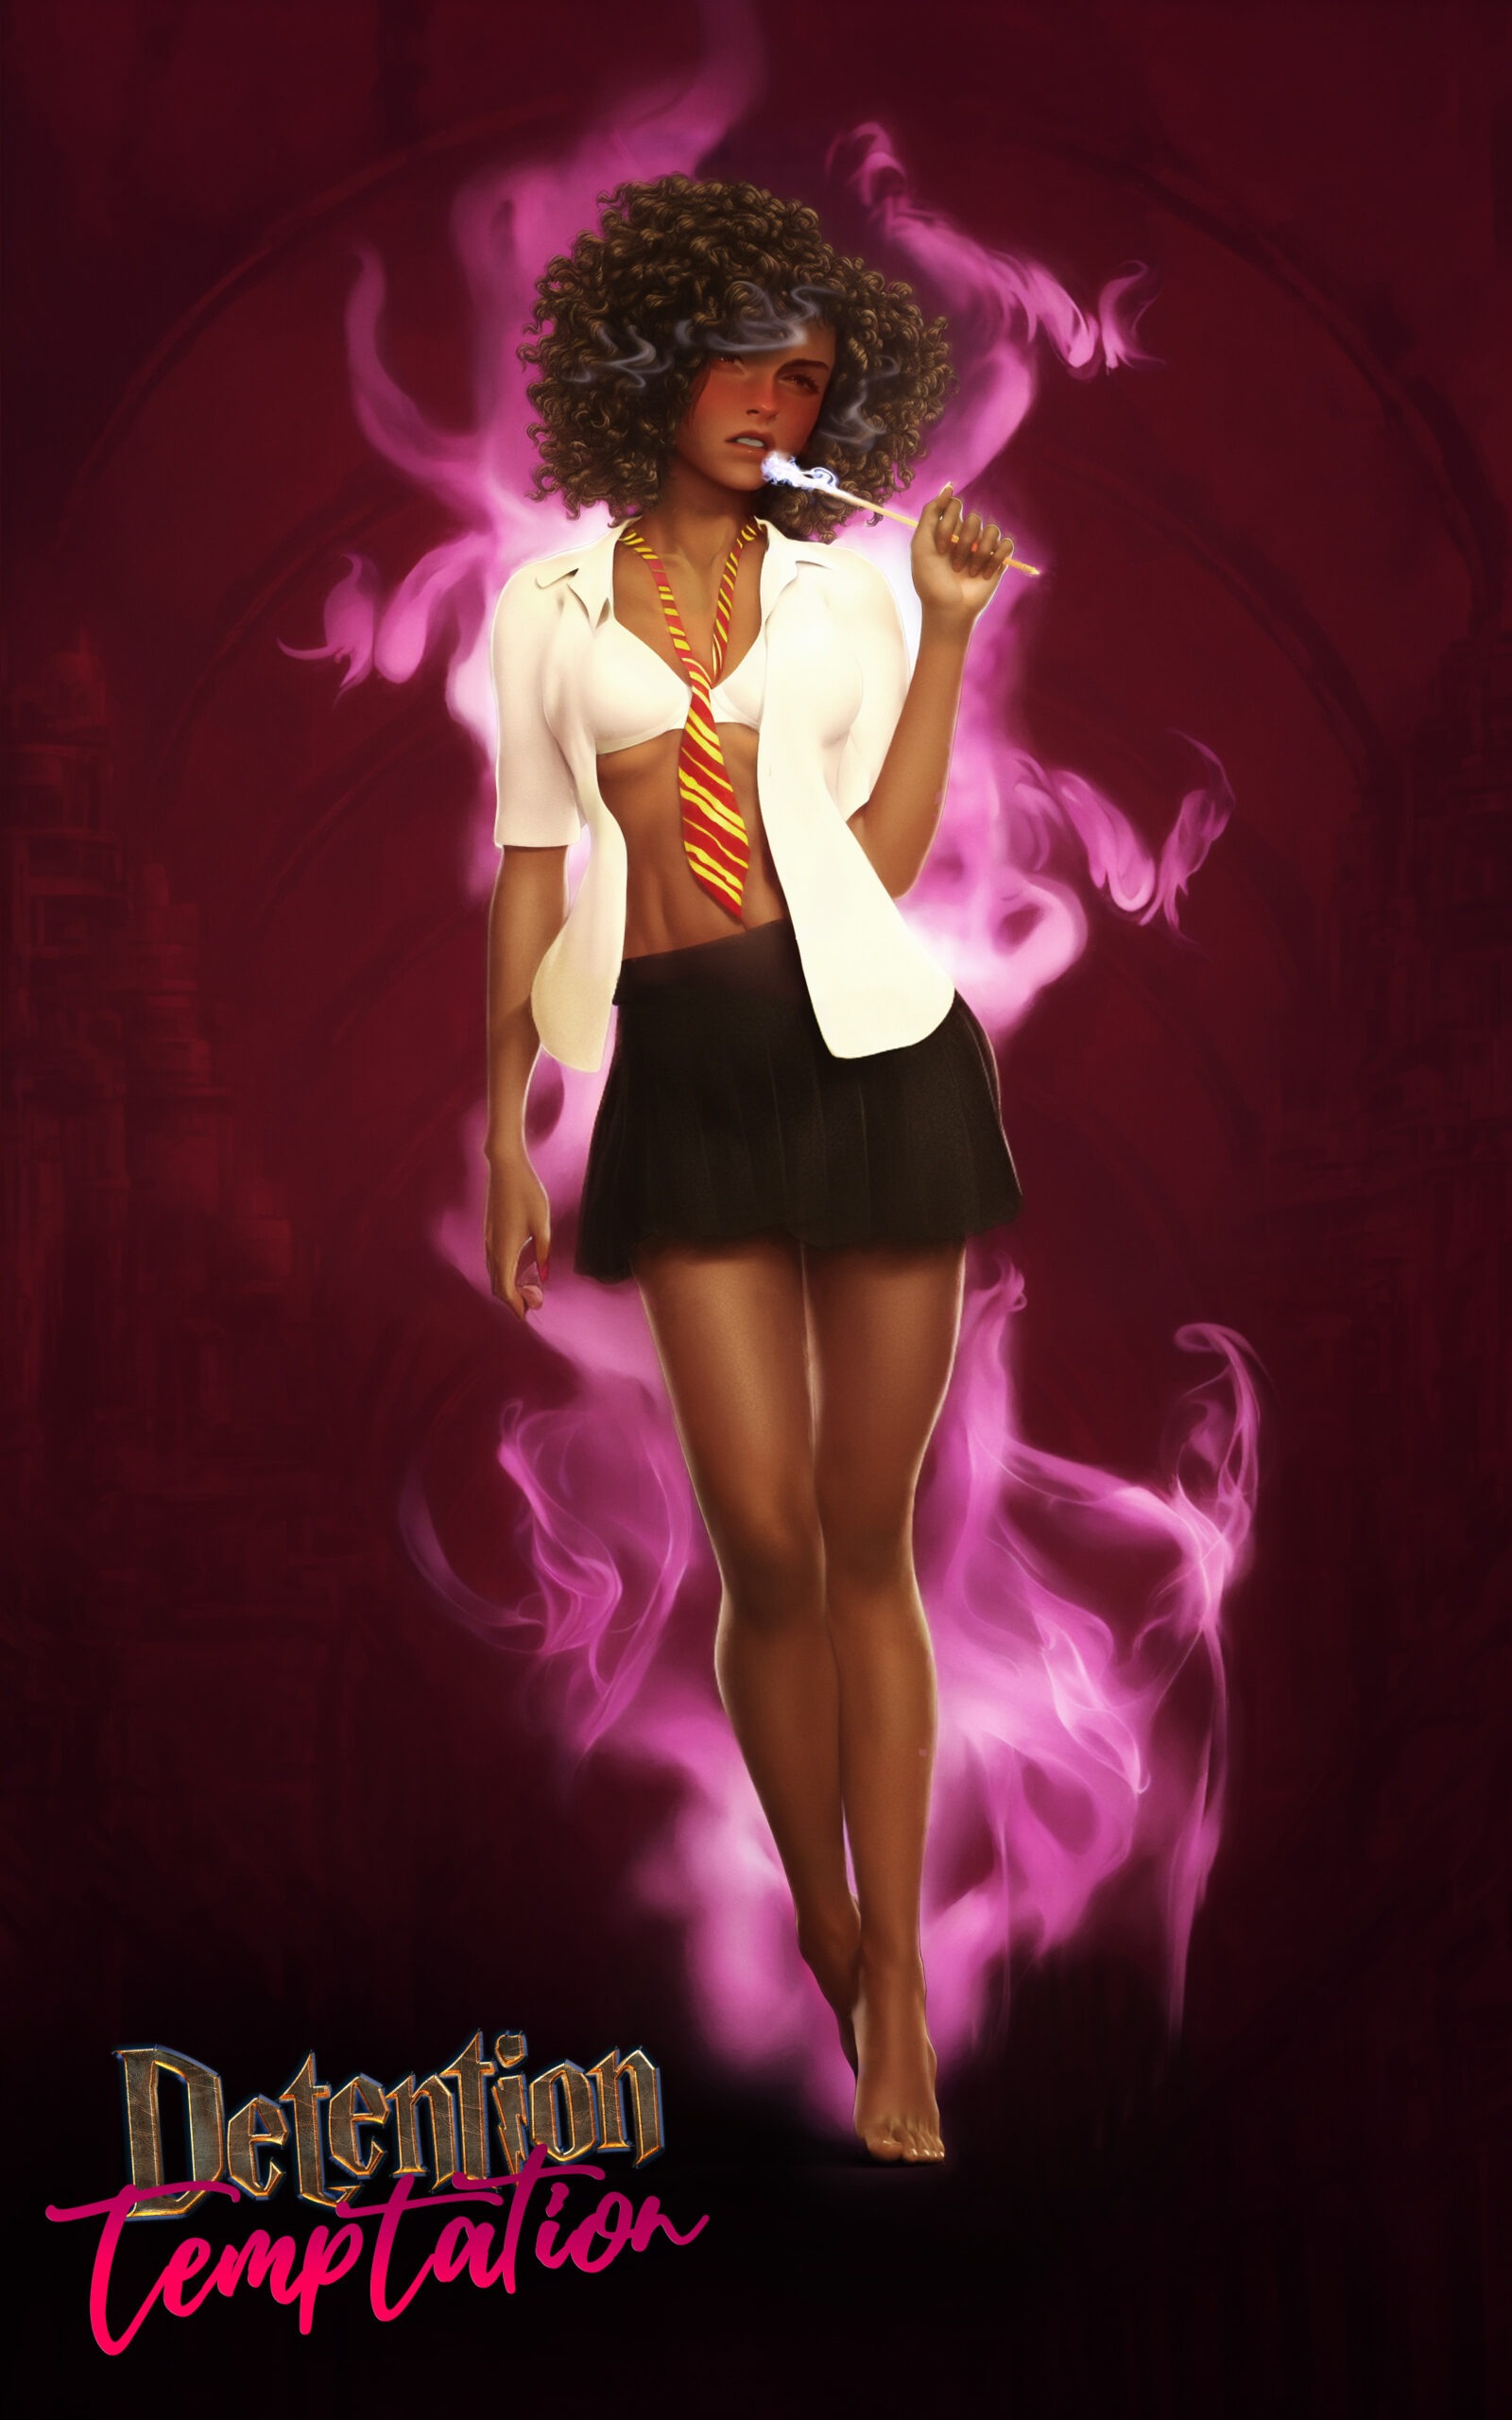 Black Hermione Granger banned cover